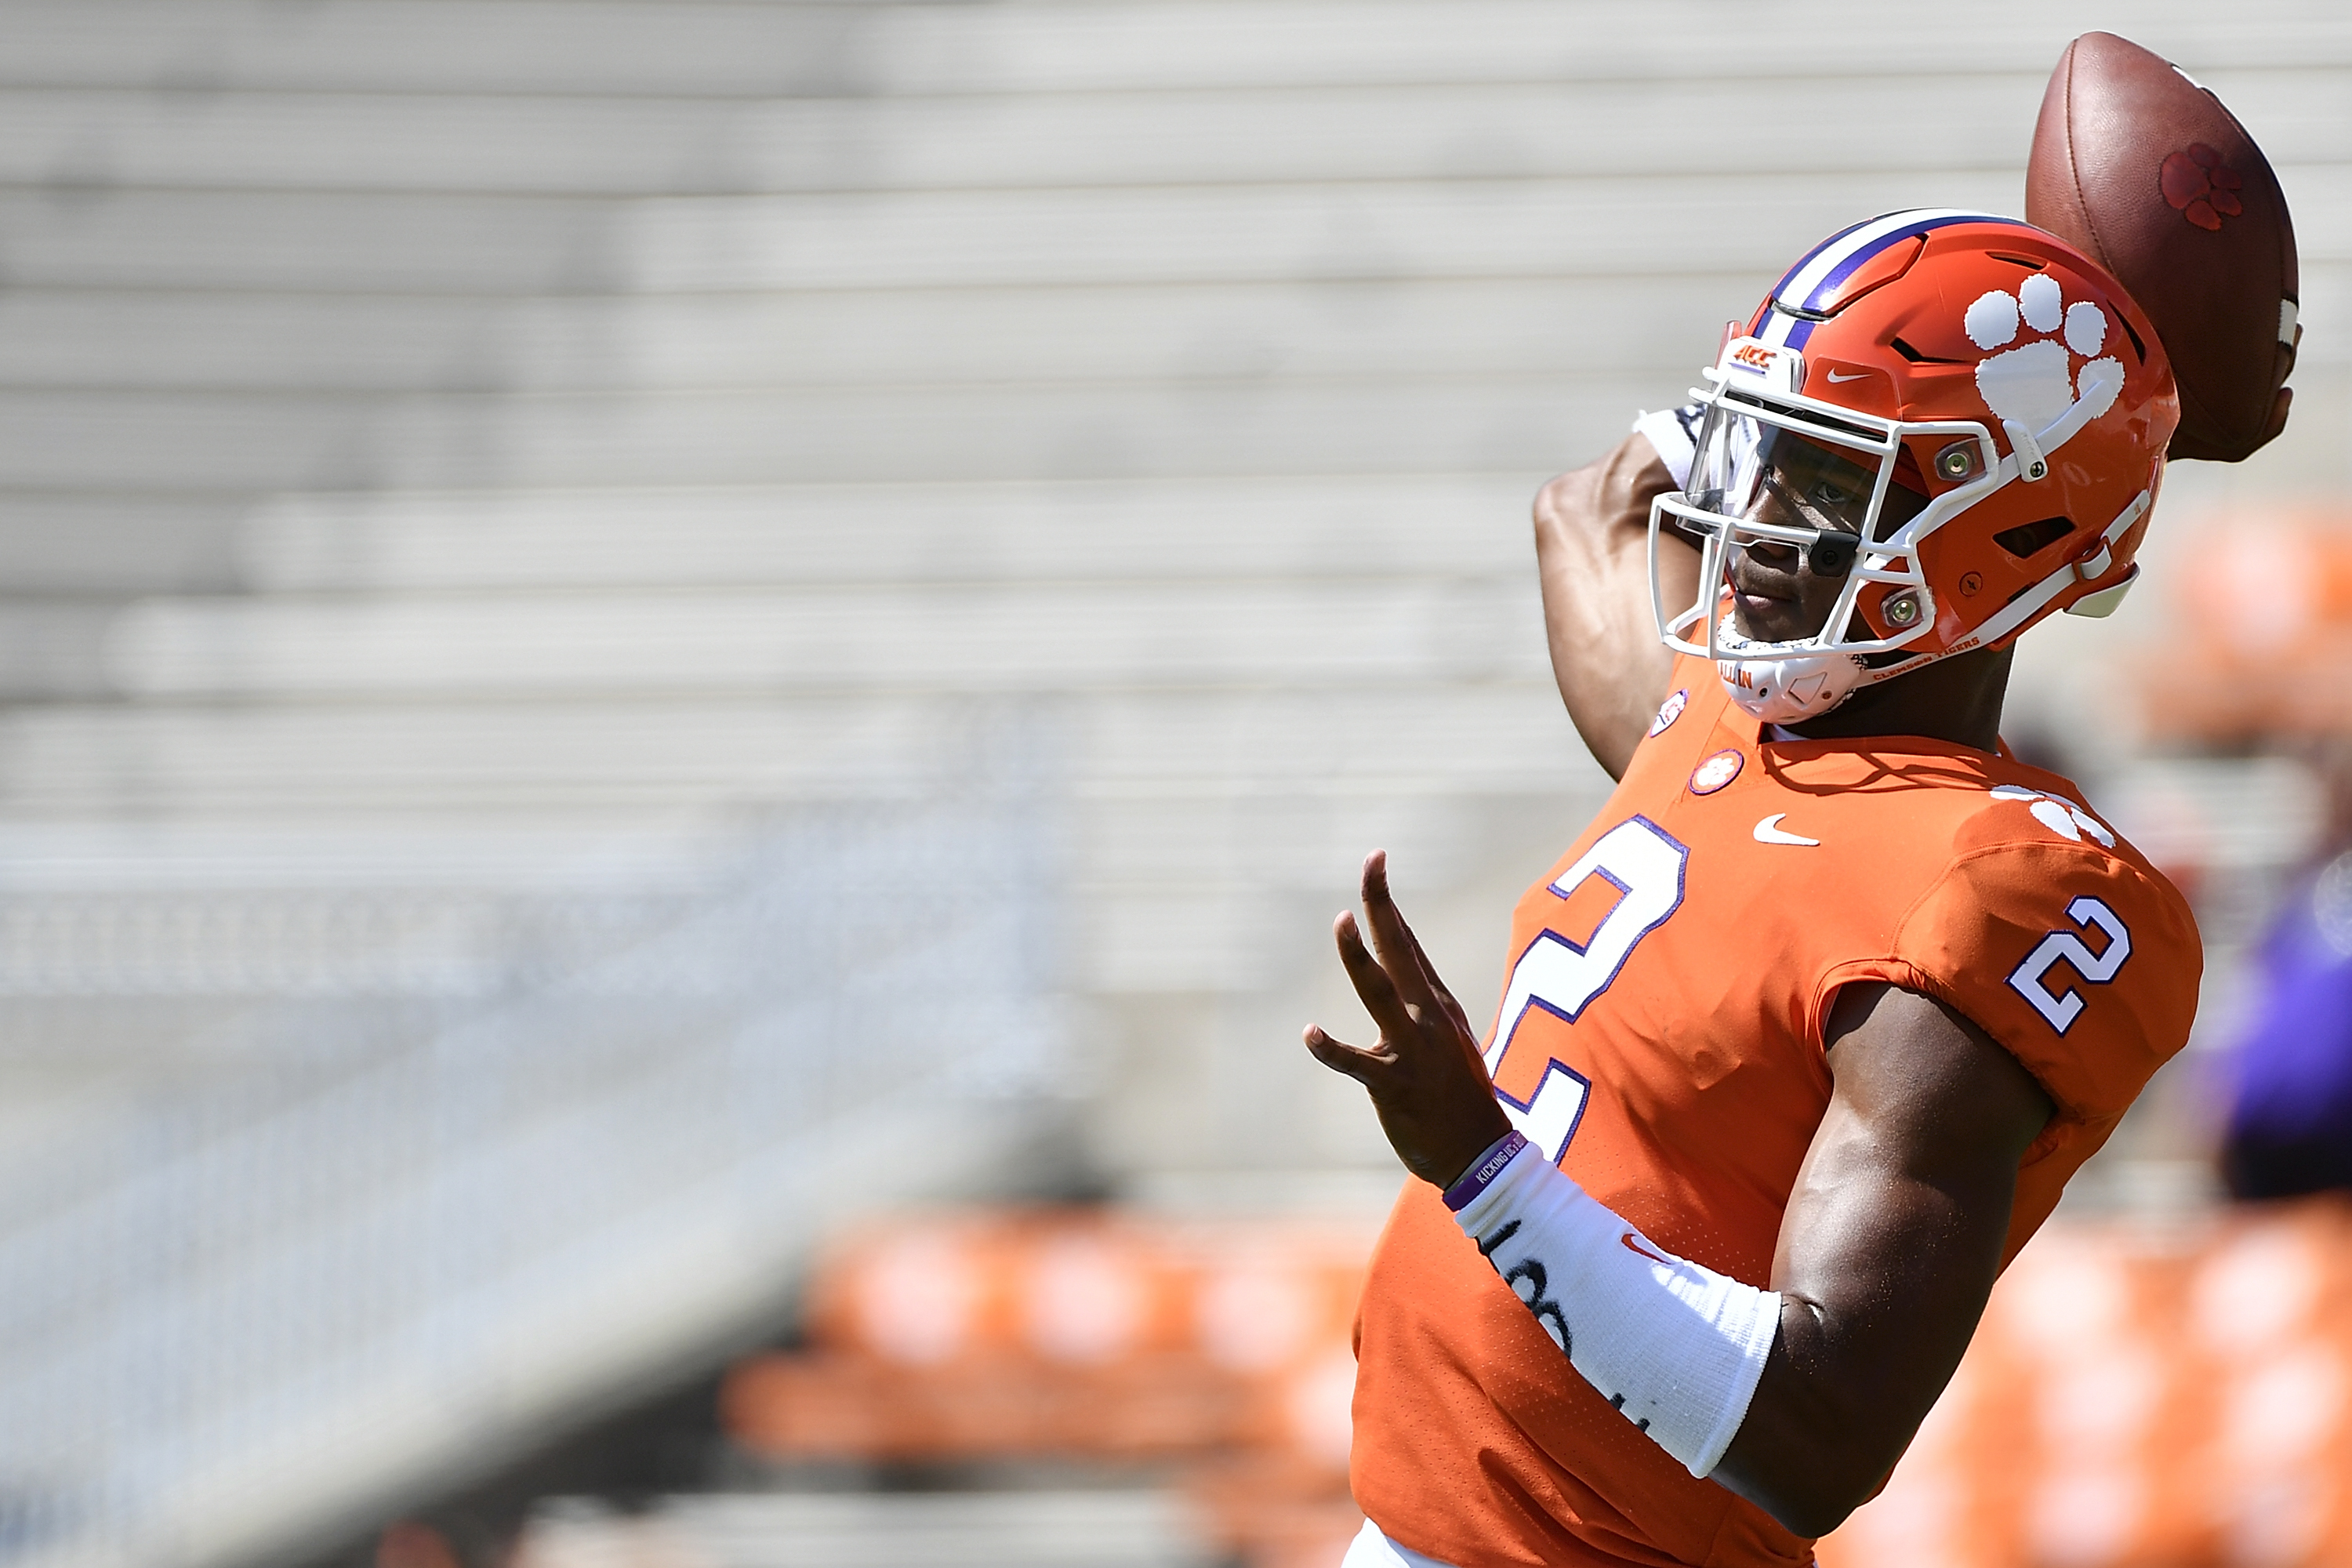 Former Clemson QB Kelly Bryant announces intention to transfer to